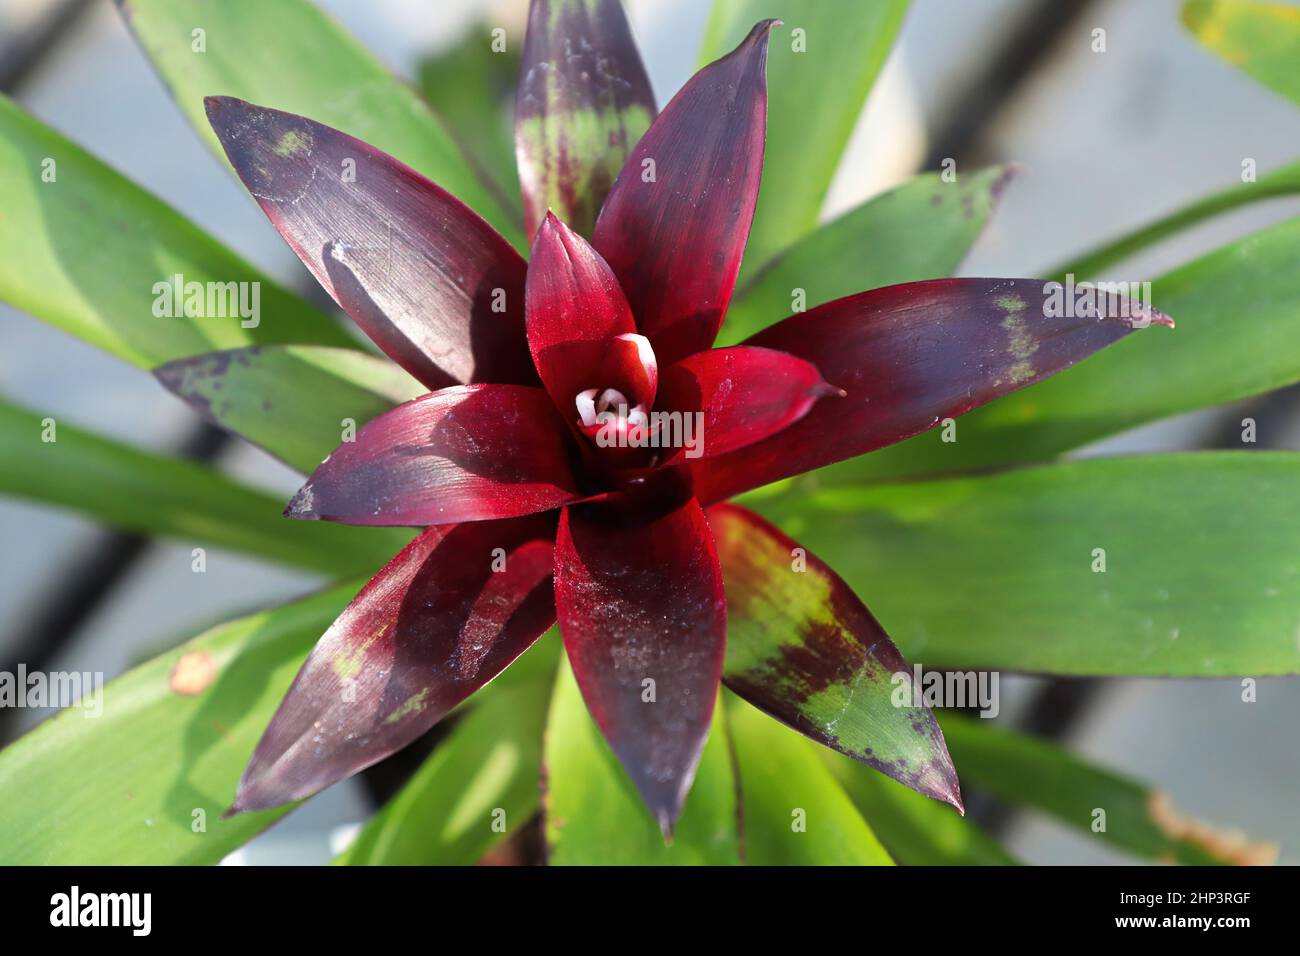 Closeup top view of red bromeliad leaf stalks. Stock Photo